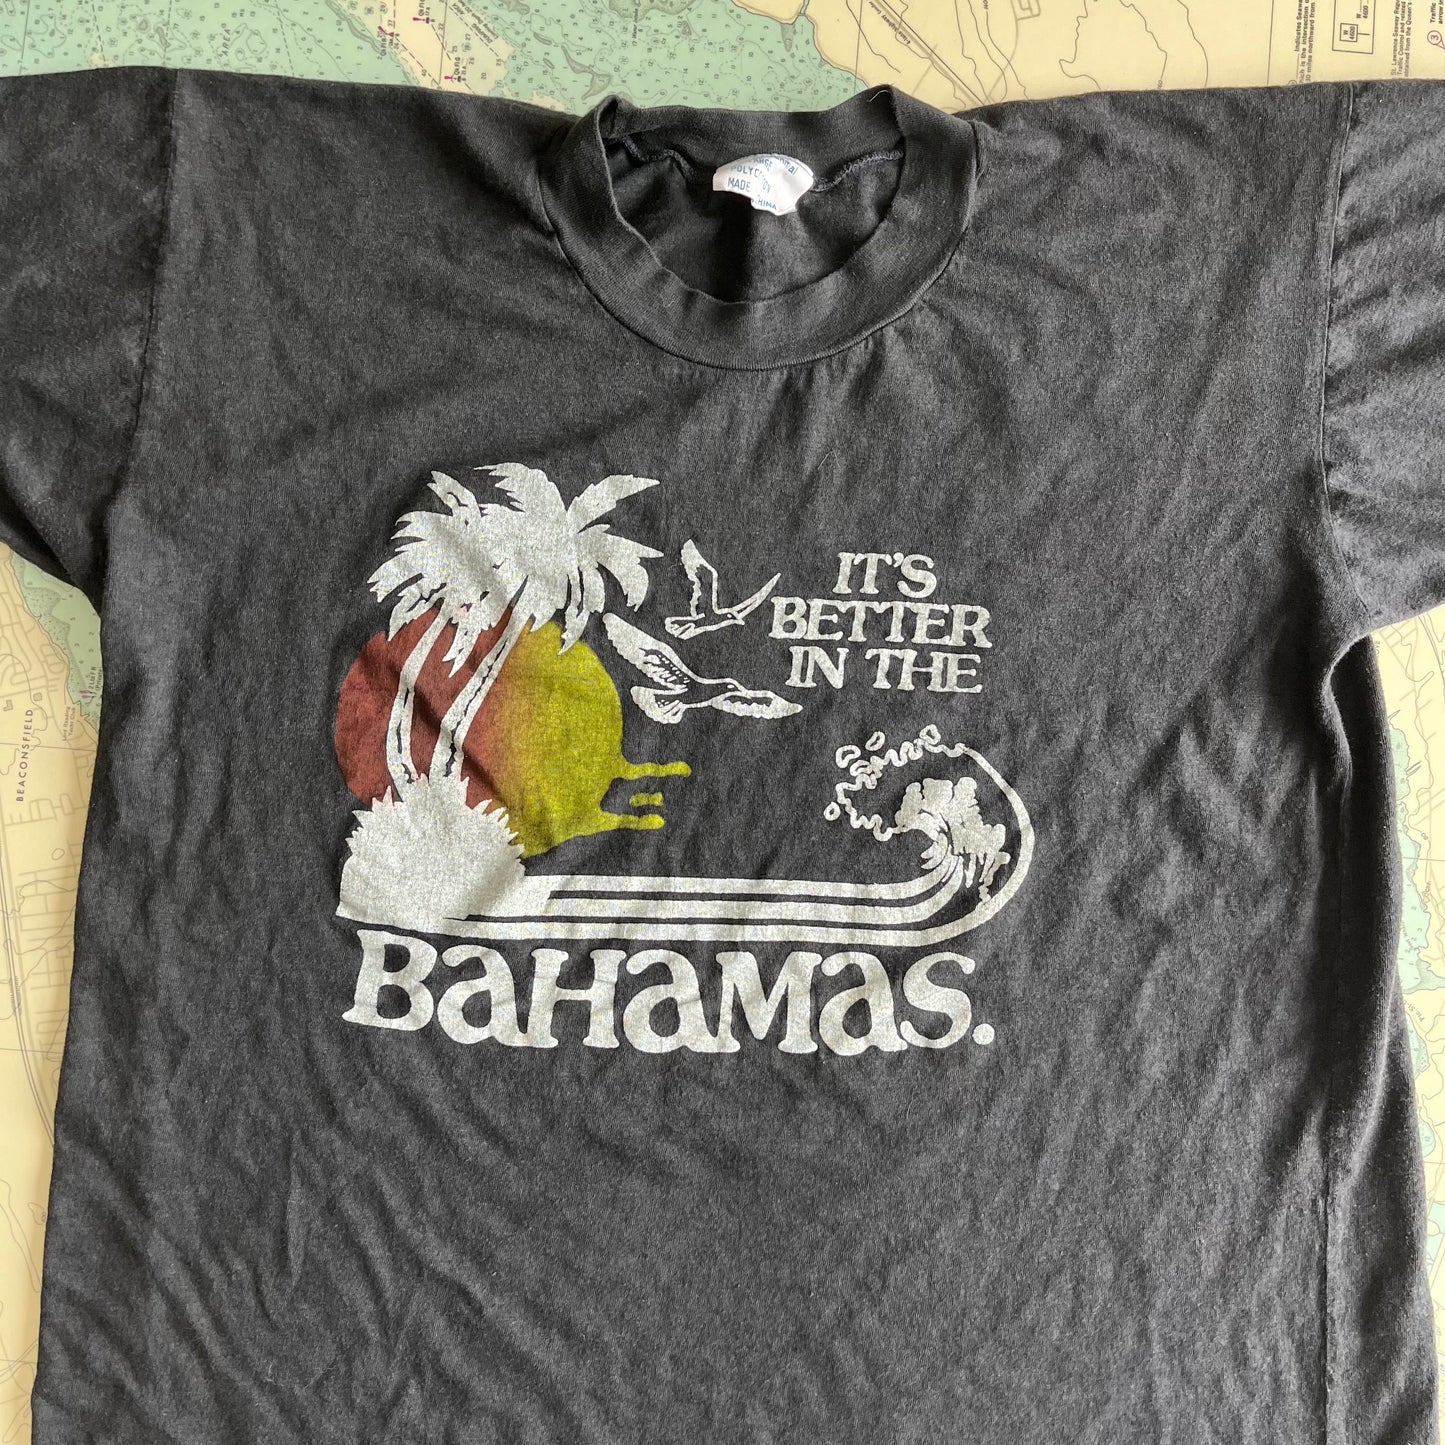 Vintage Life's Better in the Bahamas Graphic Tee